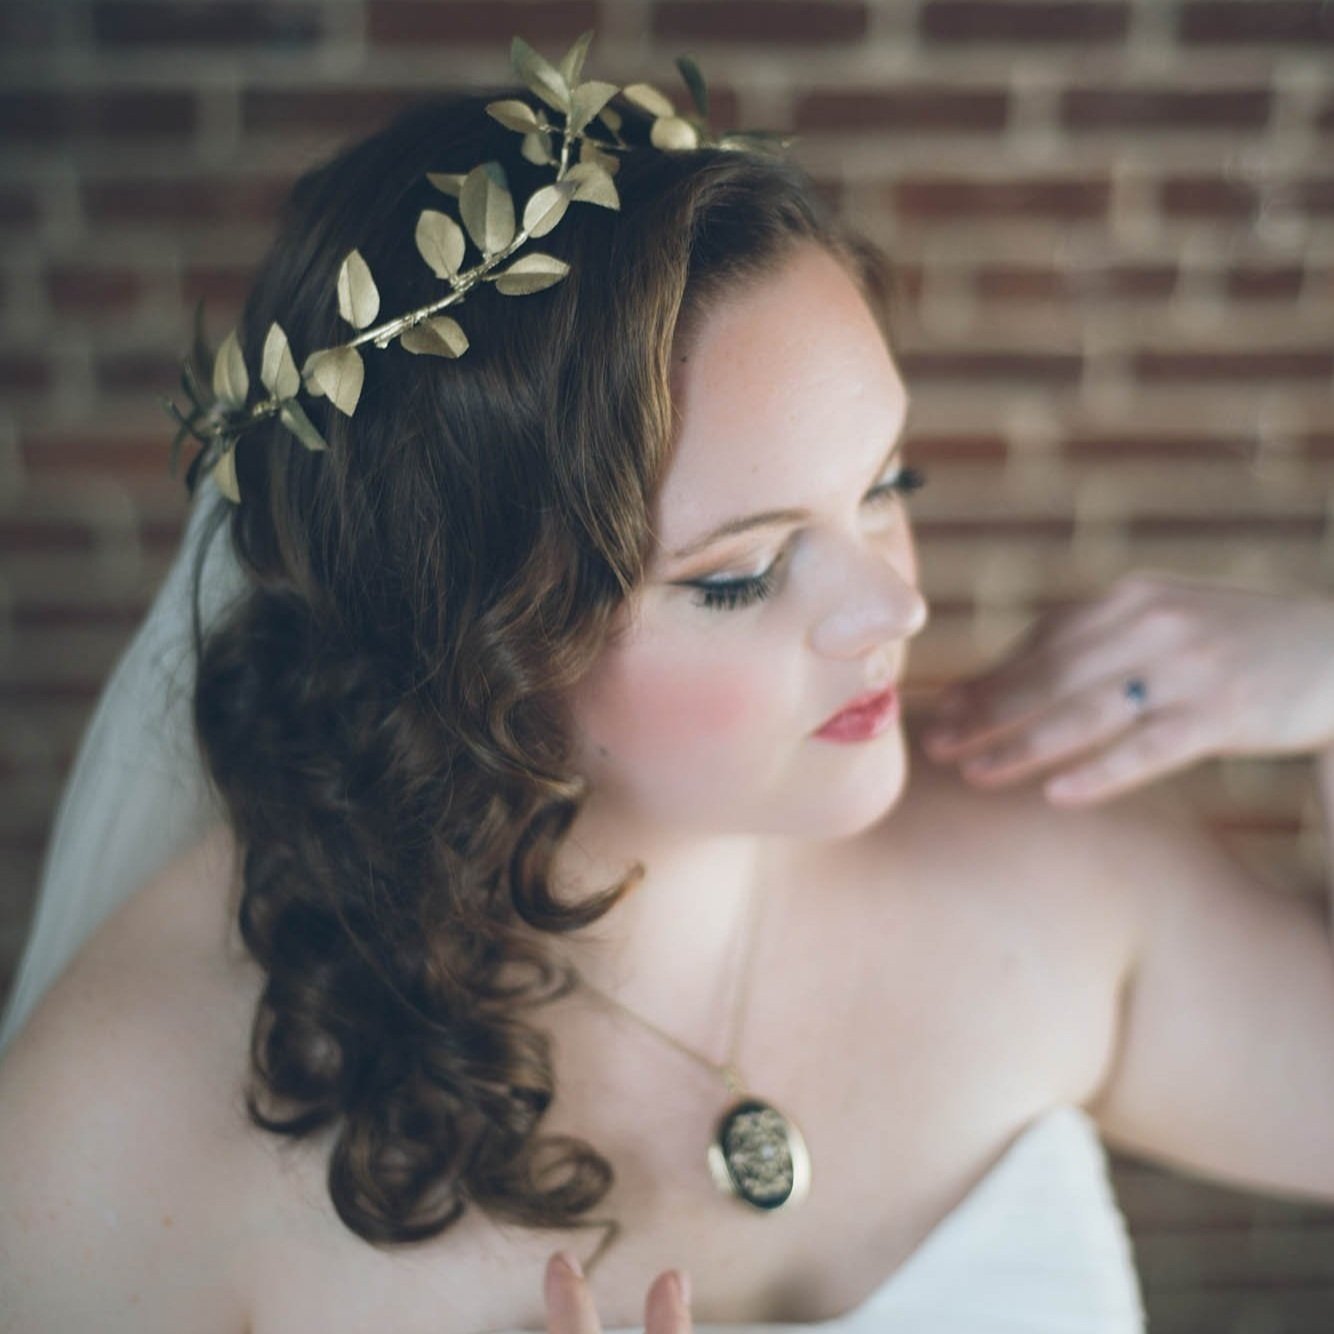 upclose portrait of bride wearing leafy crown and necklace taken by Sharma Shari Photography